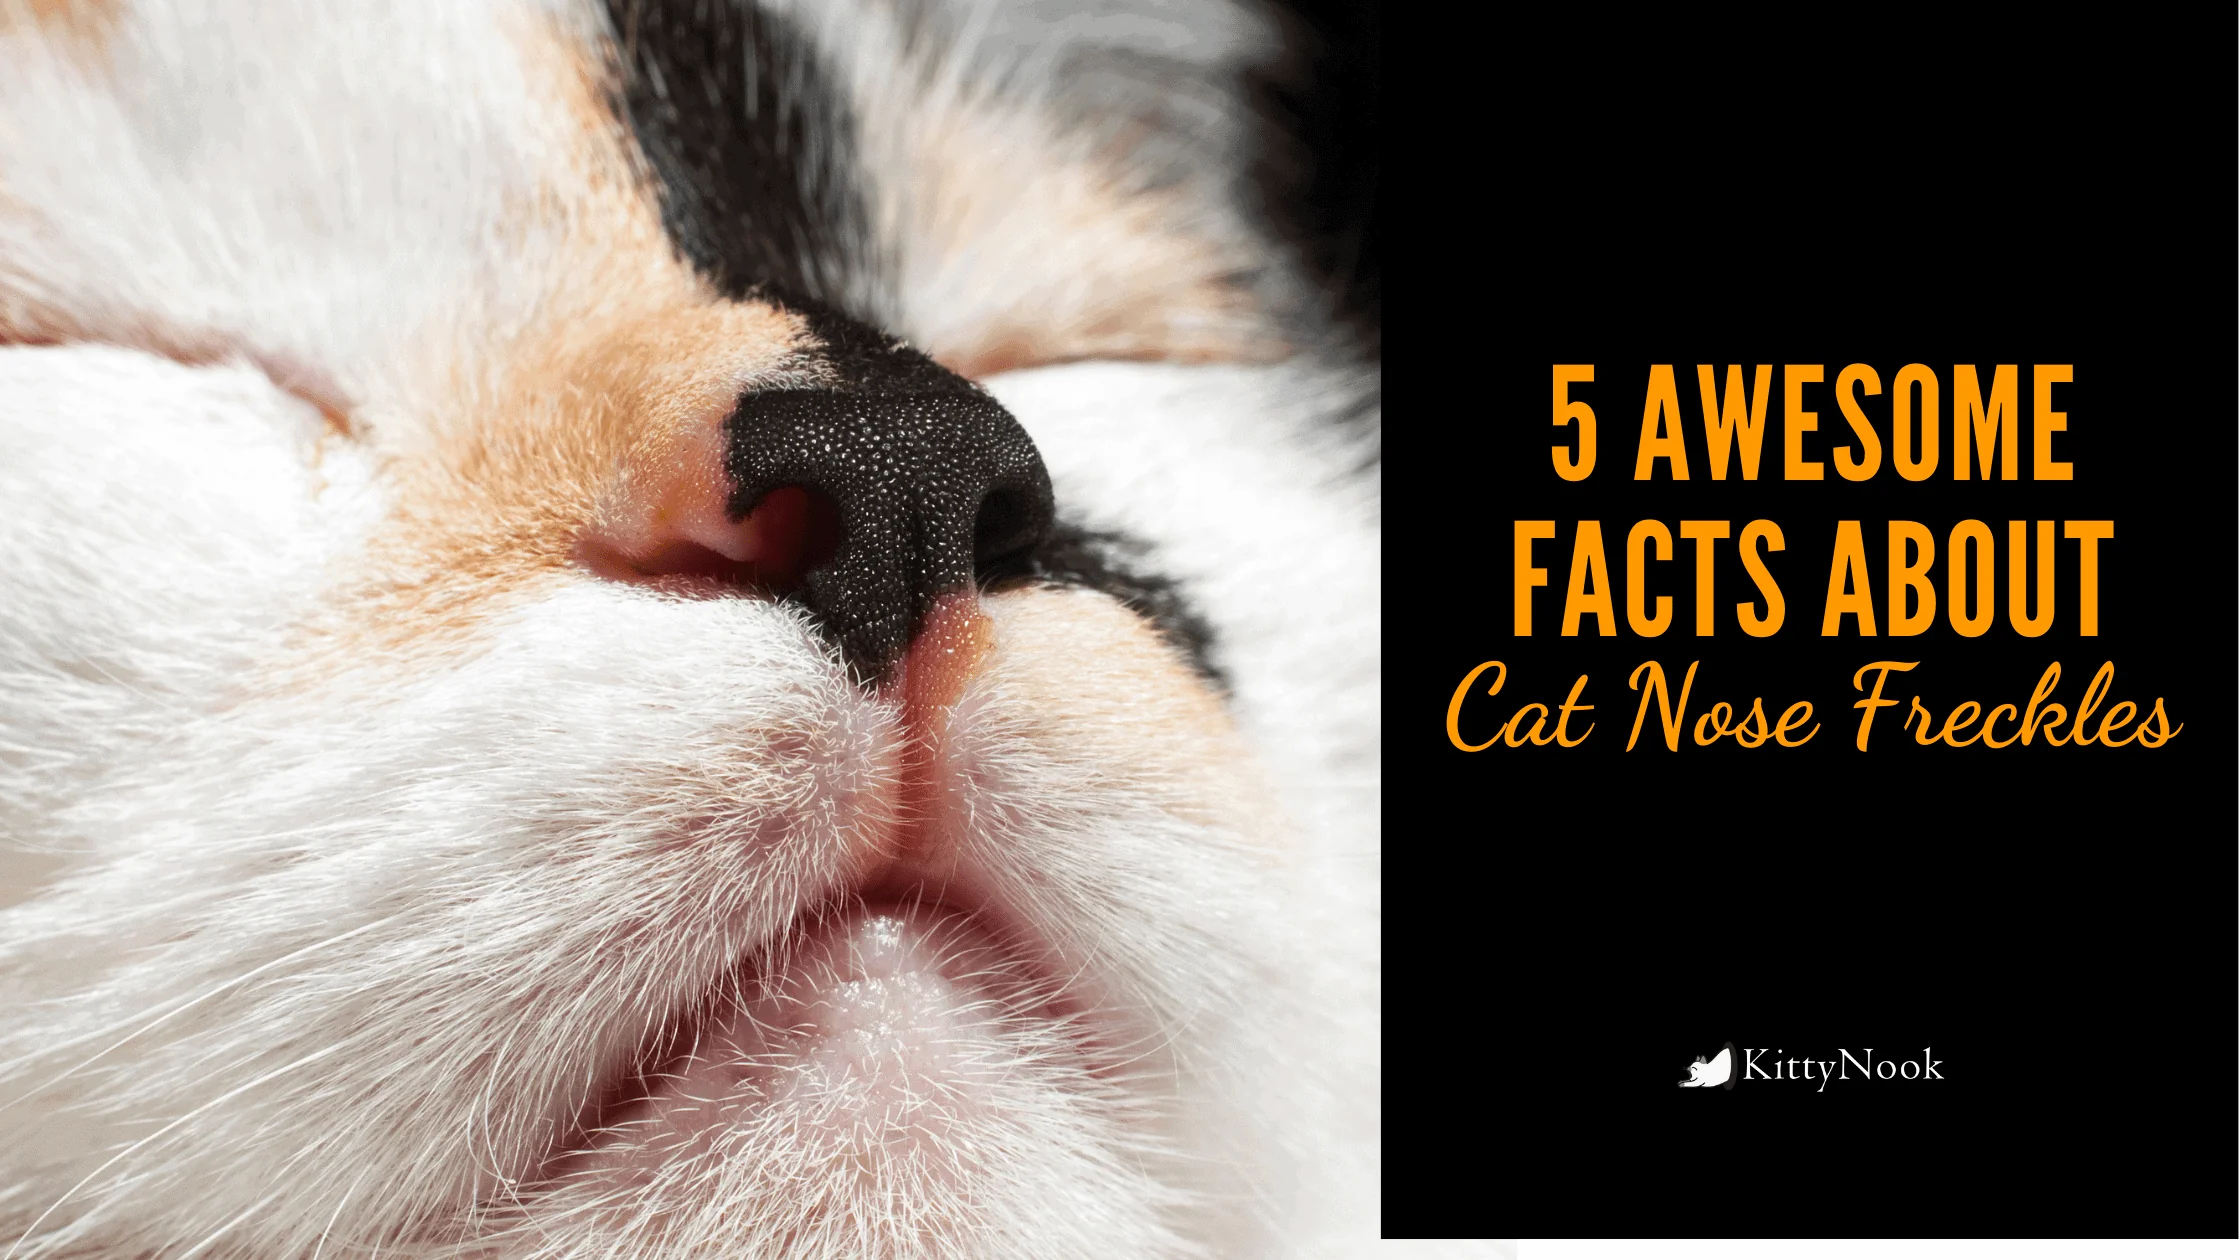 5 Awesome Facts About Cat Nose Freckles - KittyNook Cat Company